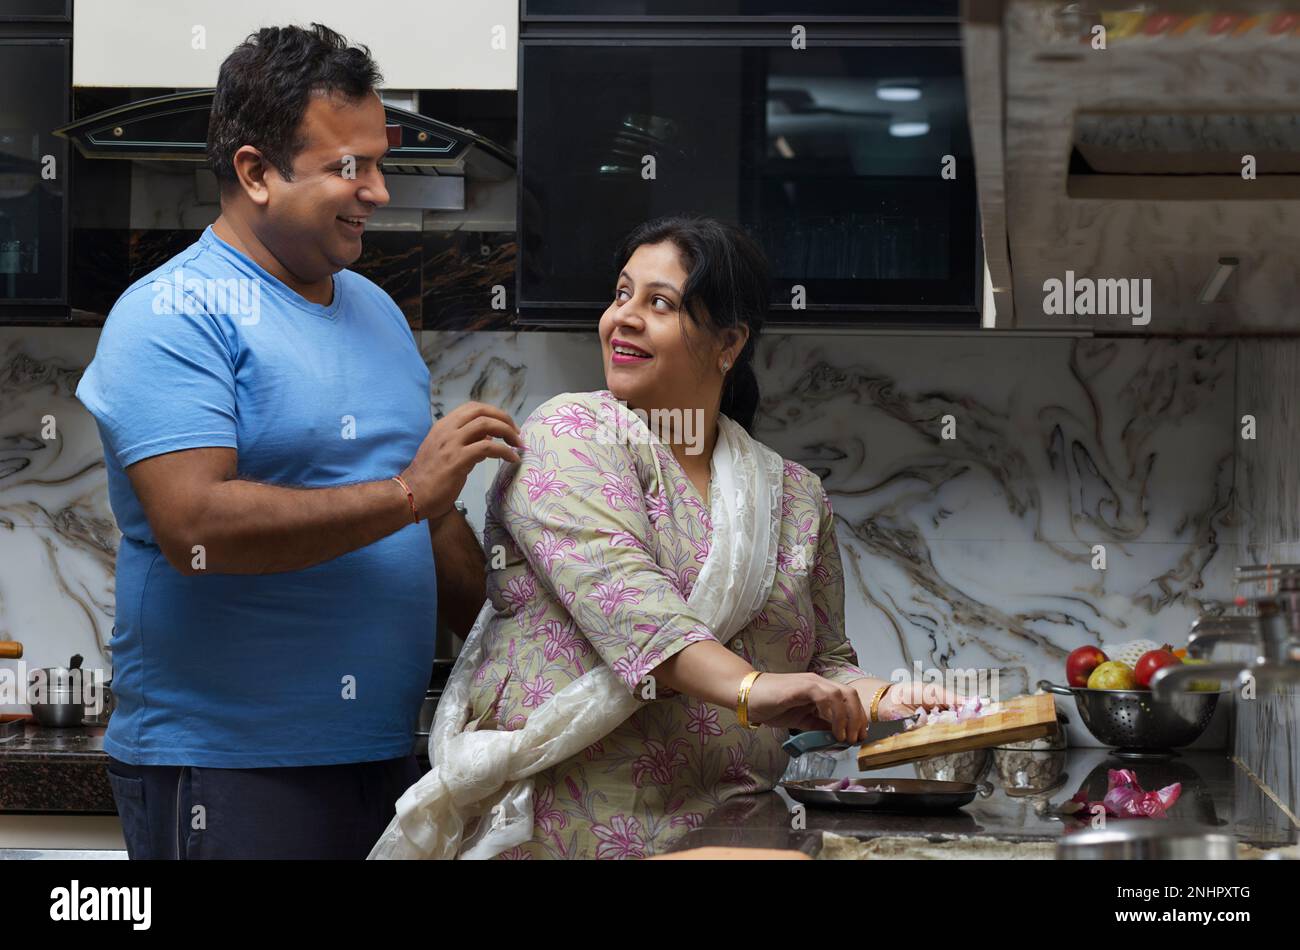 Portrait of woman chopping onion and husband standing behind in kitchen Stock Photo